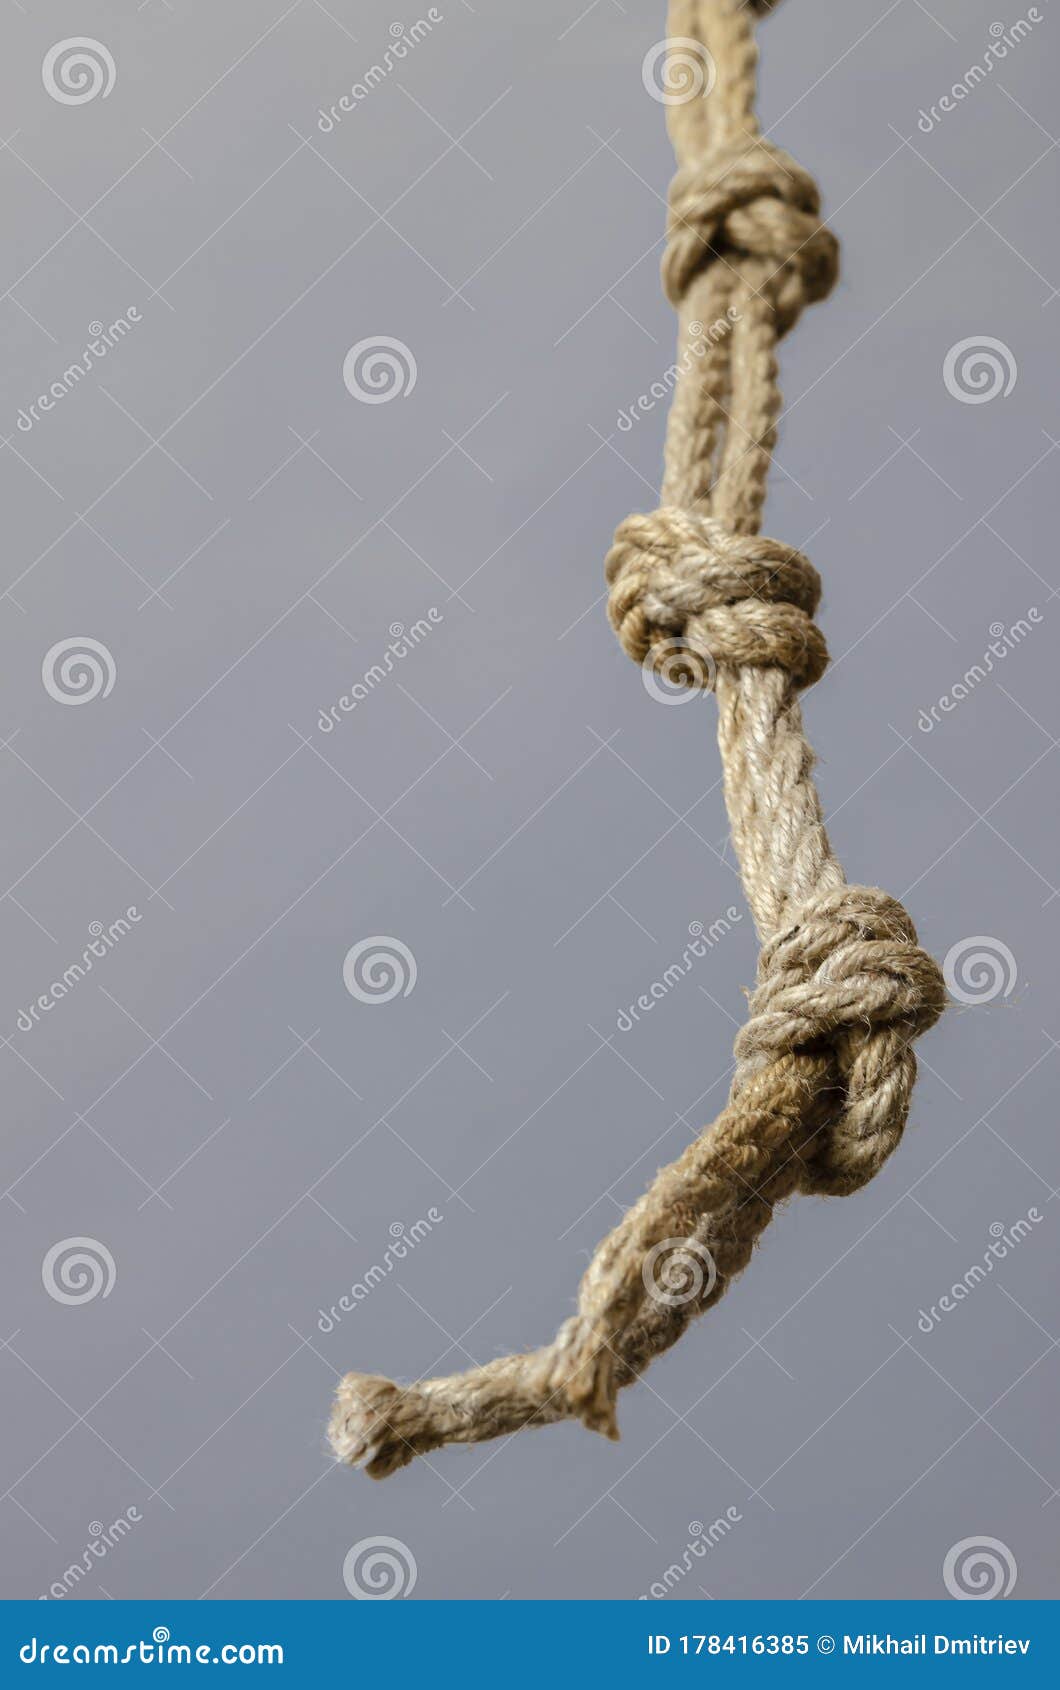 hanging knot